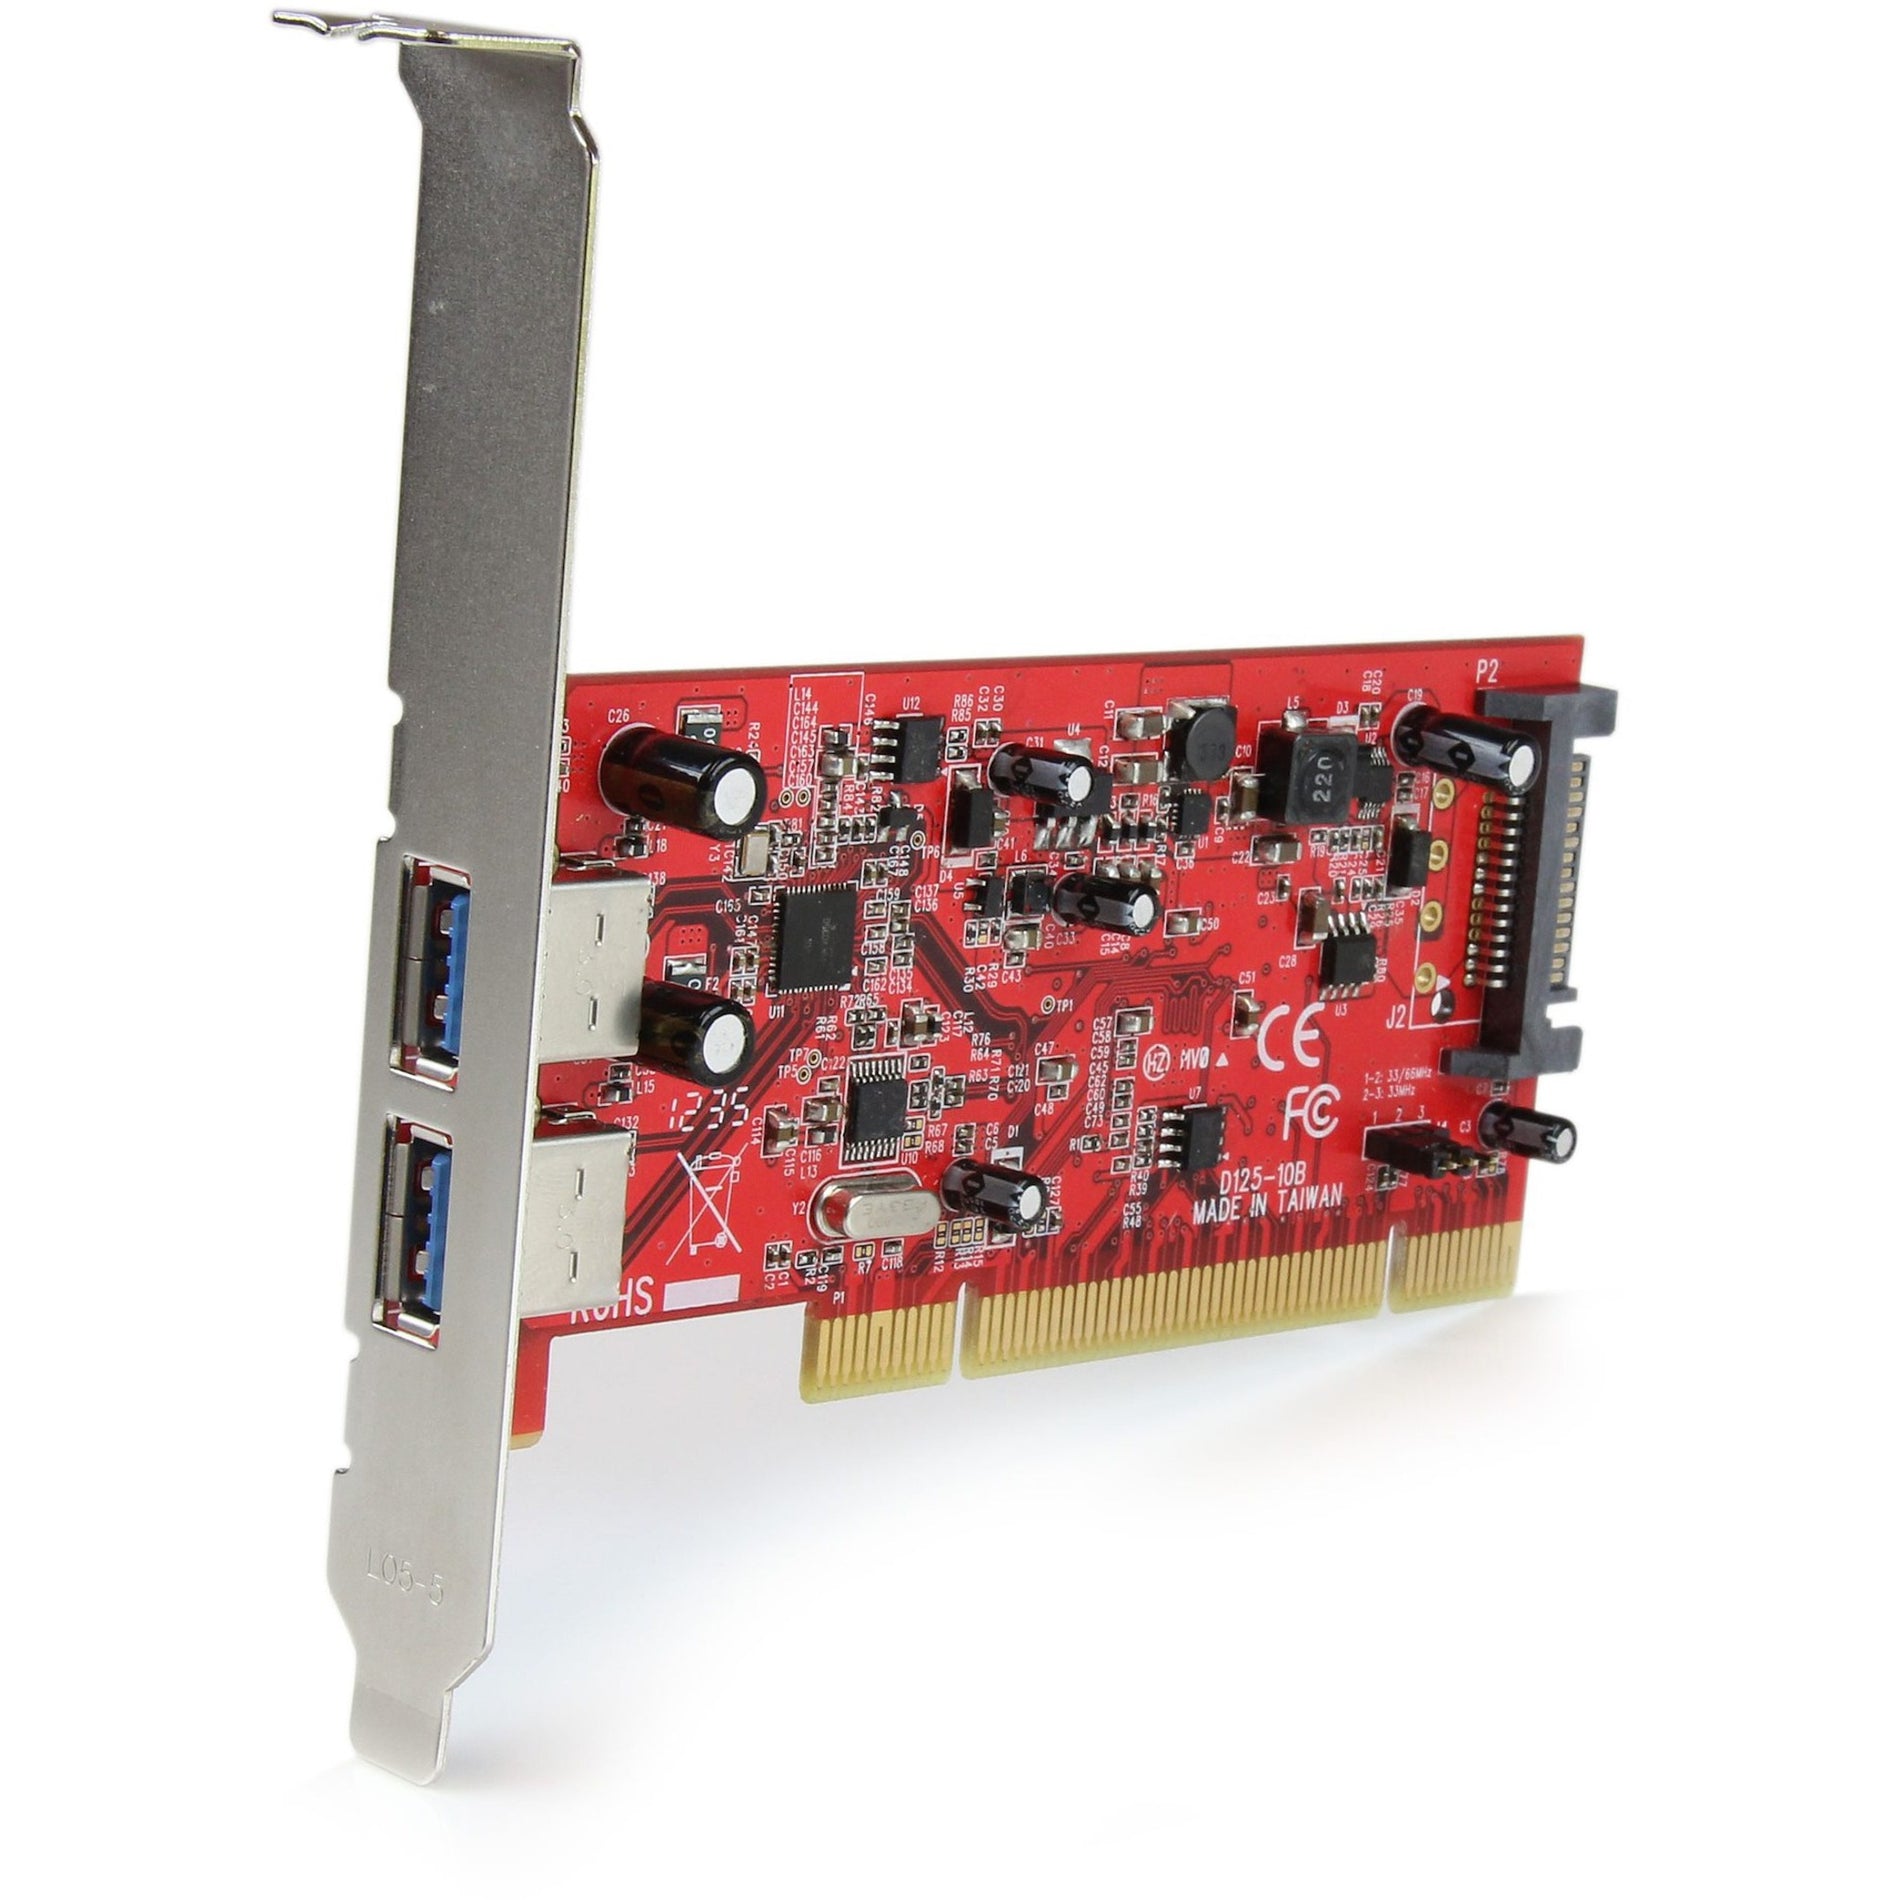 StarTech.com PCIUSB3S22 2 Port PCI SuperSpeed USB 3.0 Adapter Card with SATA Power High-Speed Data Transfer and Easy Installation